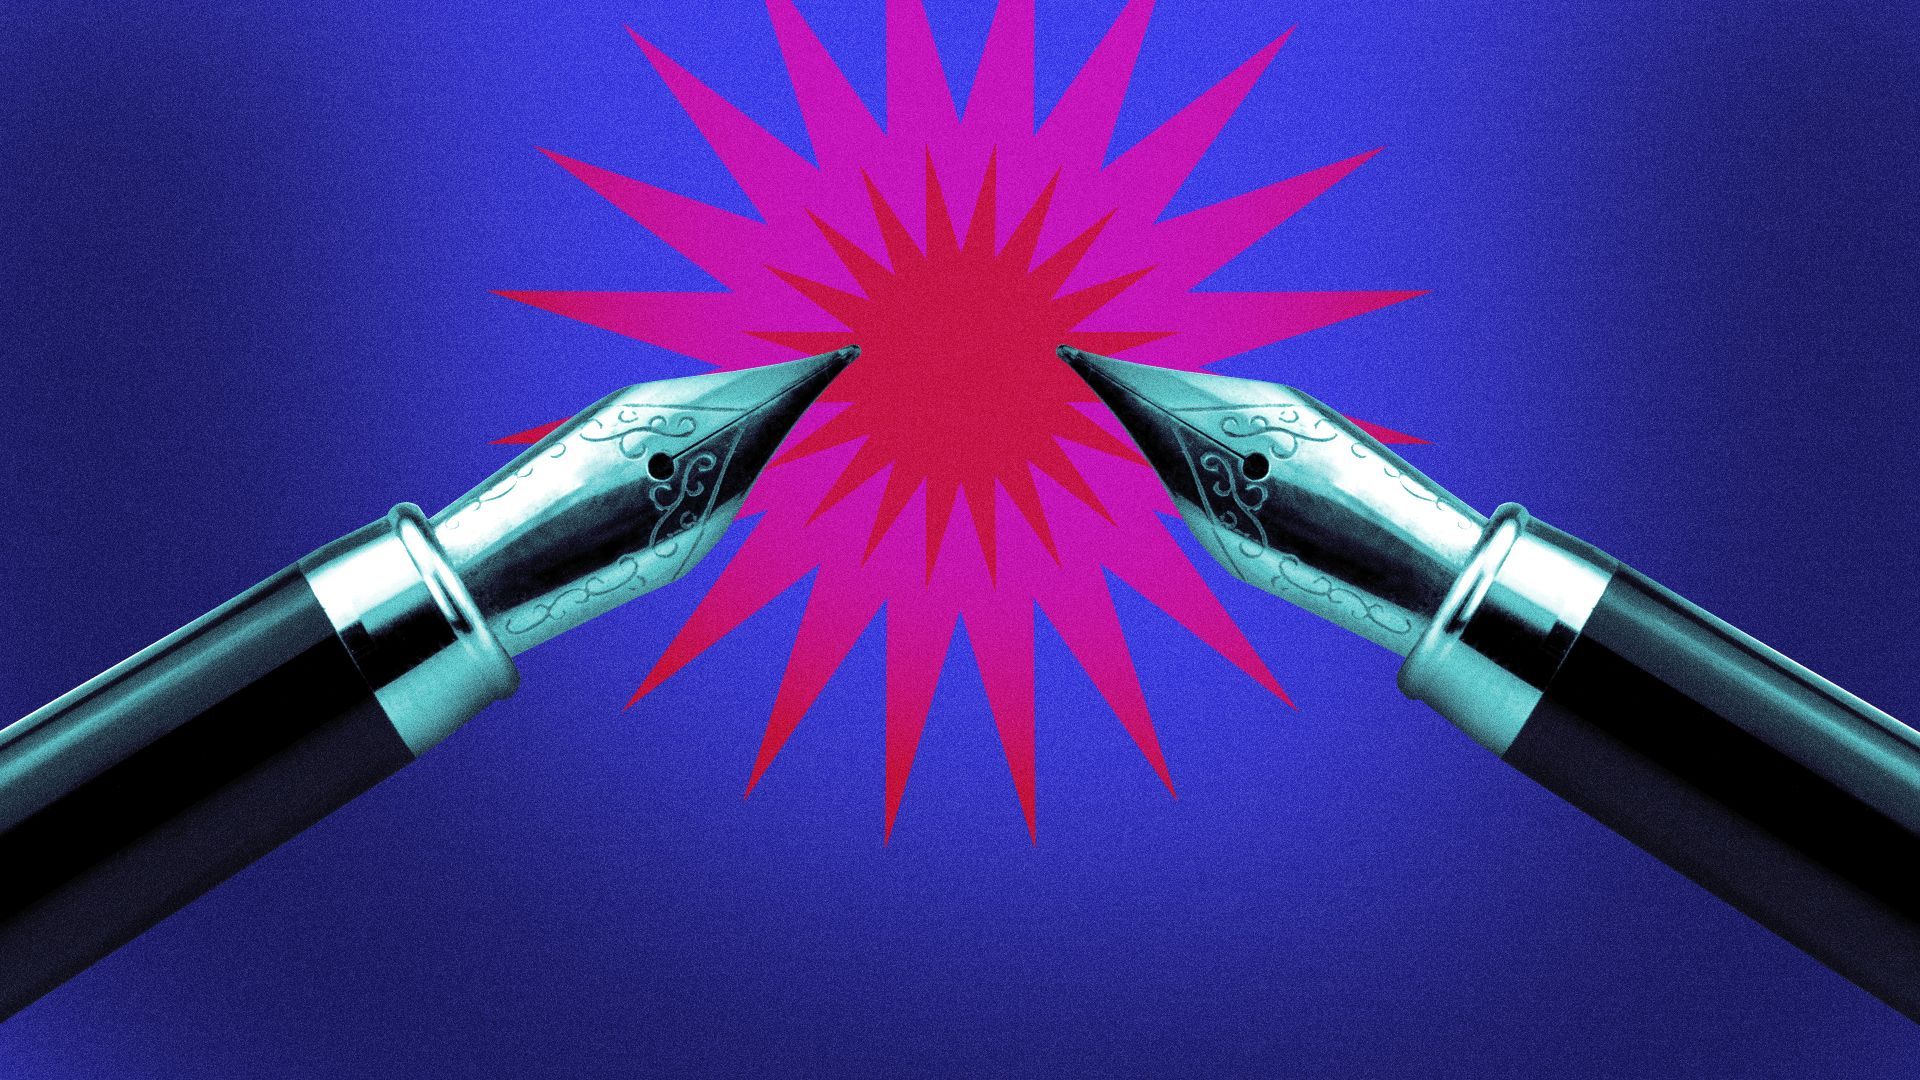 Illustration of two fountain pens facing off against an abstract pop of color.